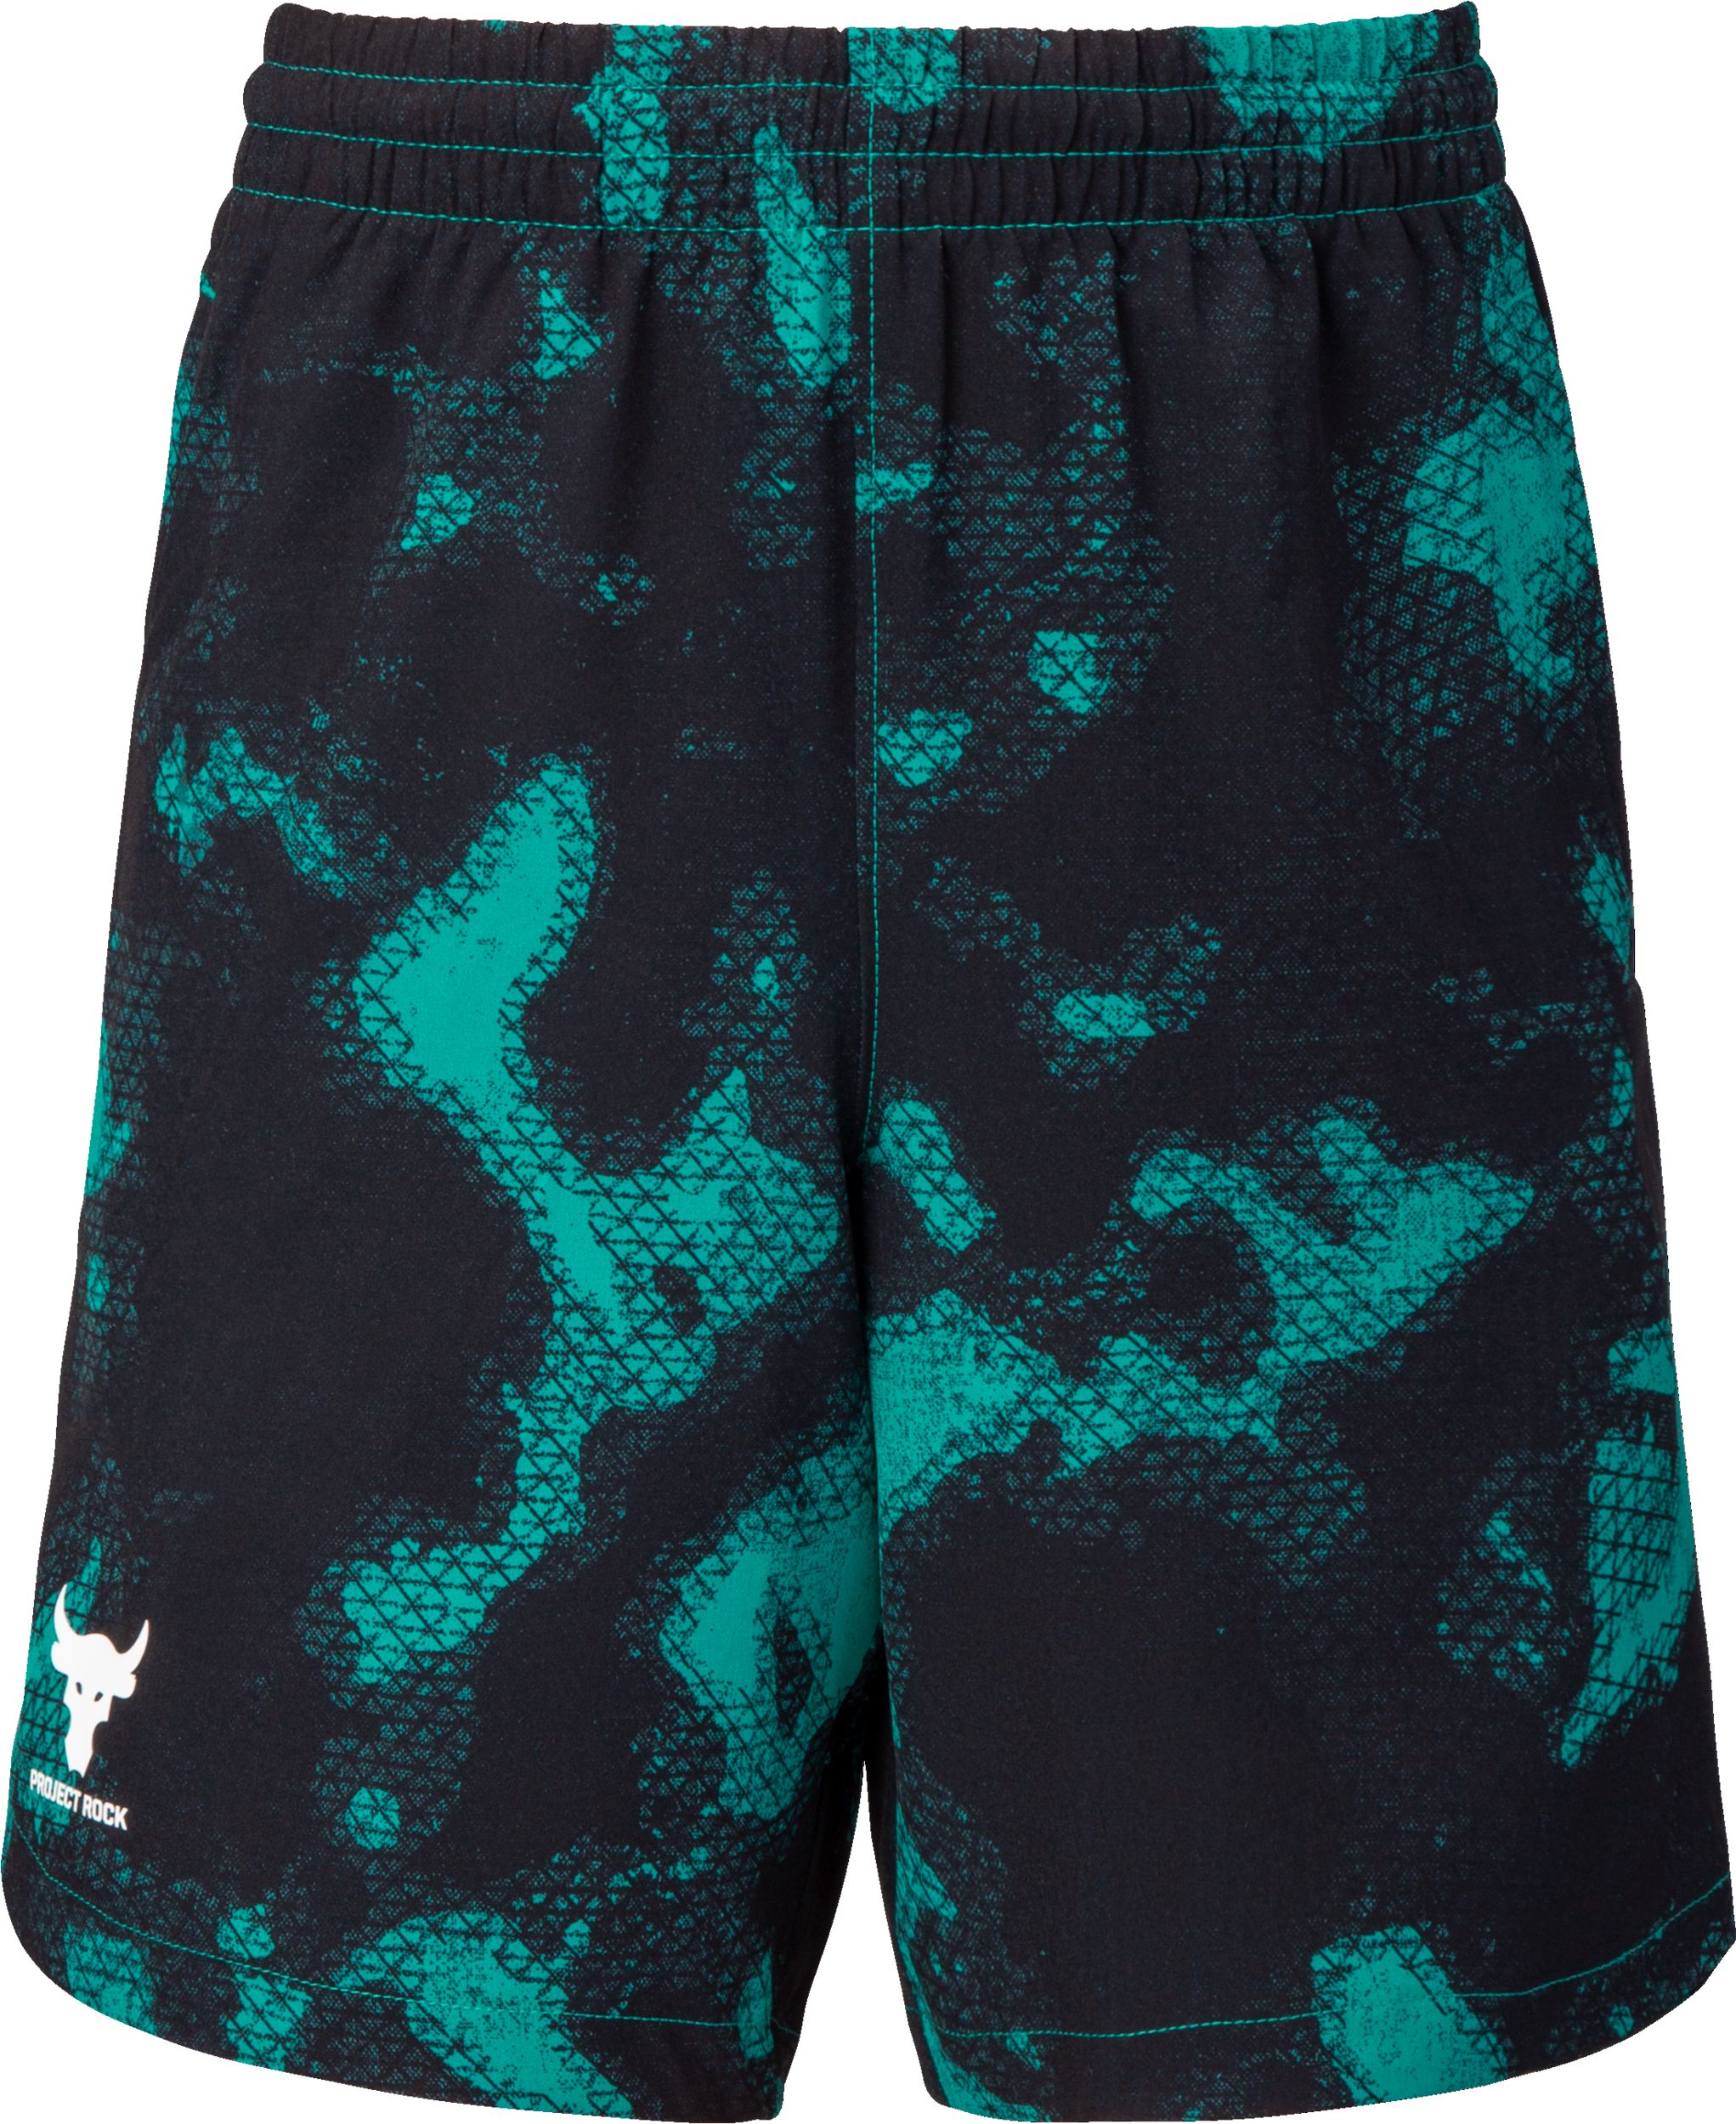 Under Armour Boys' Project Rock Printed Woven Shorts